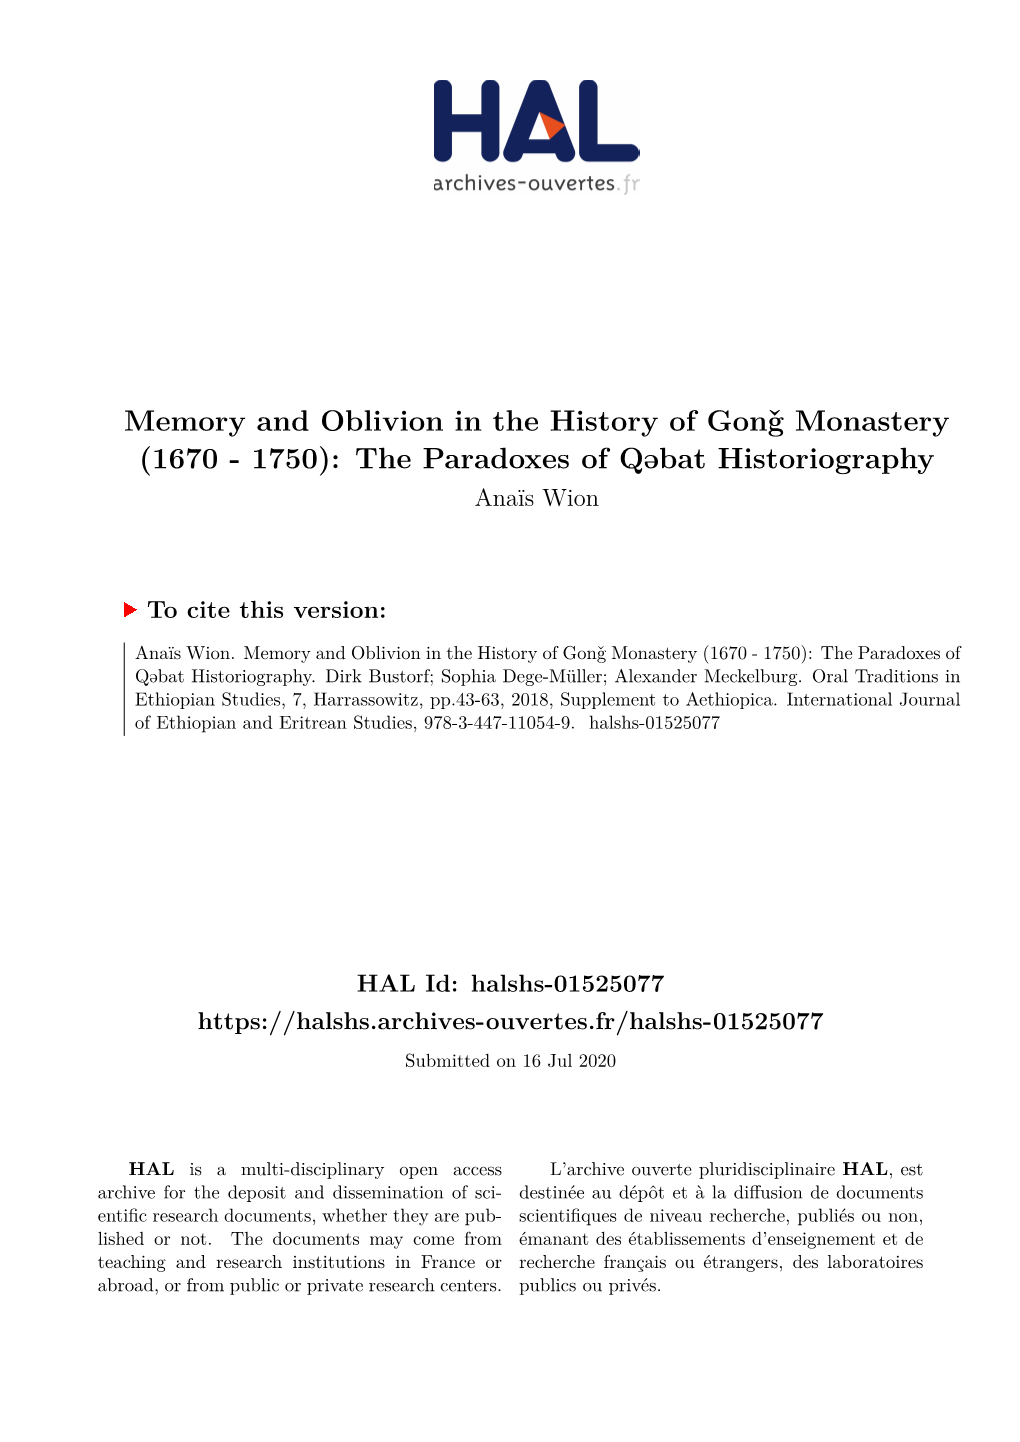 Memory and Oblivion in the History of Gonǧ Monastery (1670 - 1750): the Paradoxes of Qǝbat Historiography Anaïs Wion